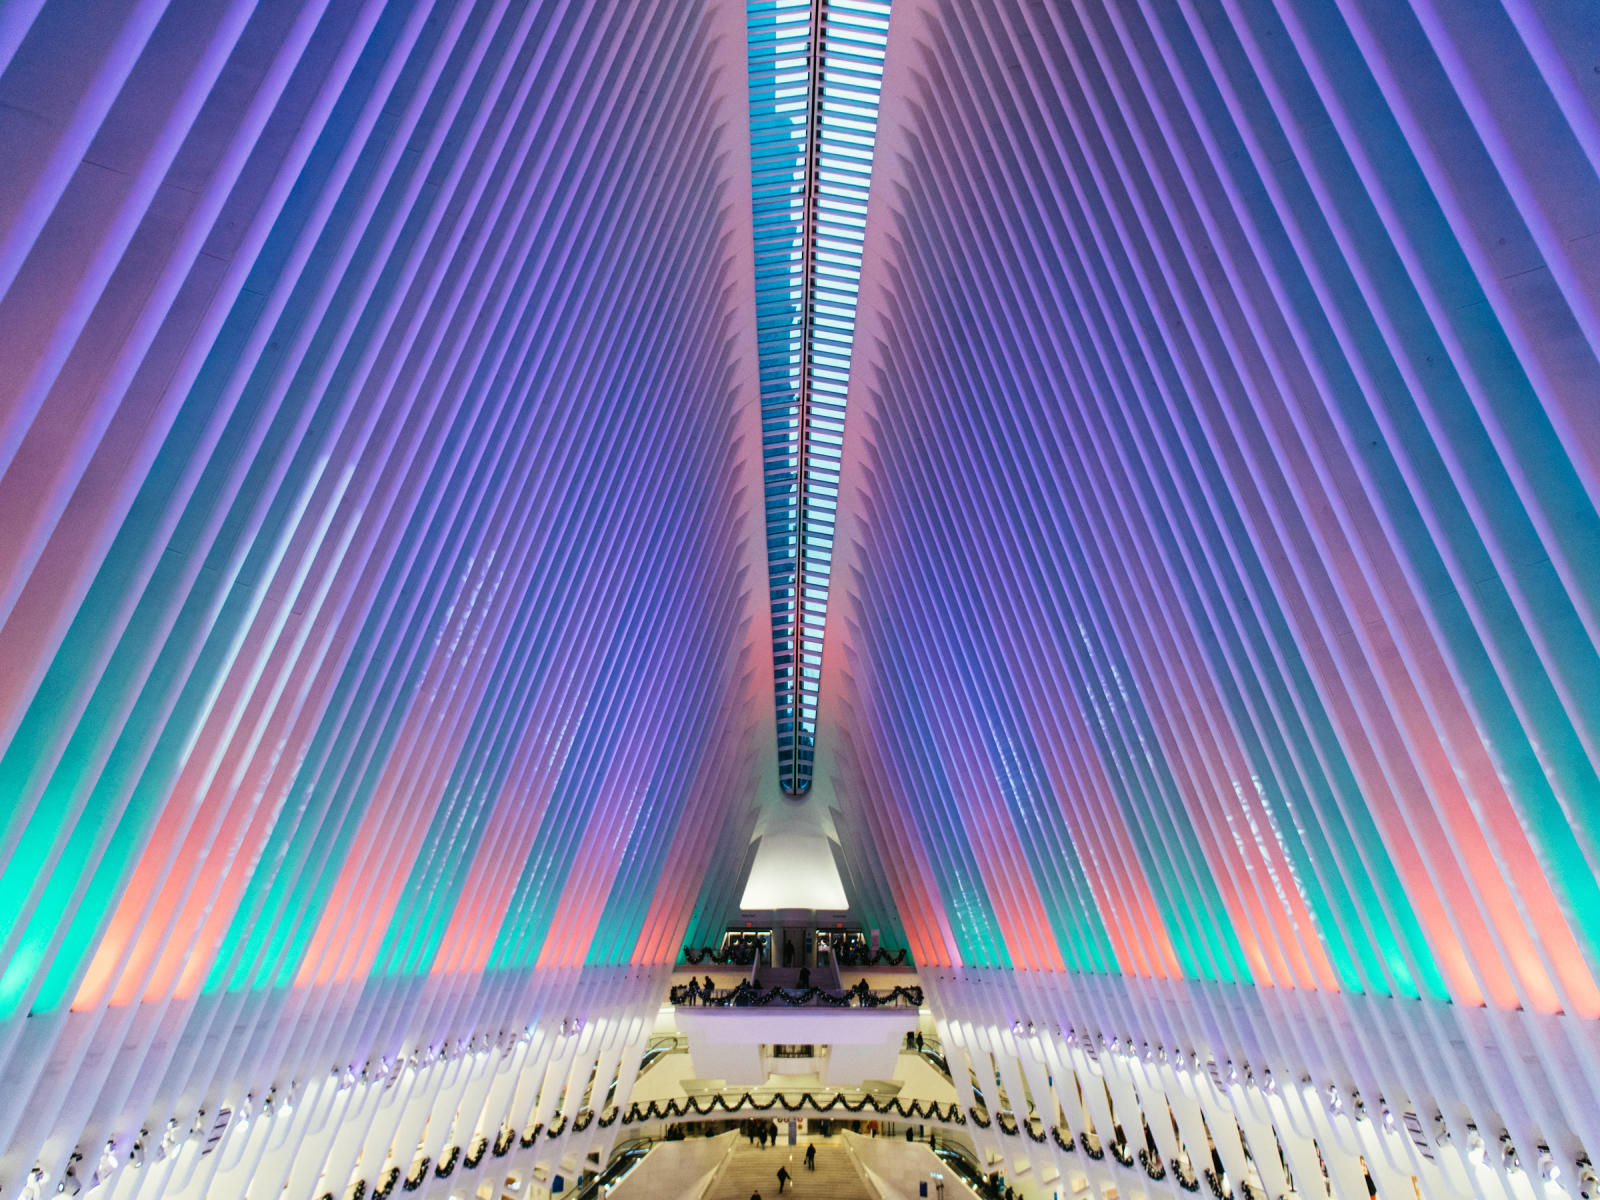 The stunning architecture of the interior of Oculus is truly an art.